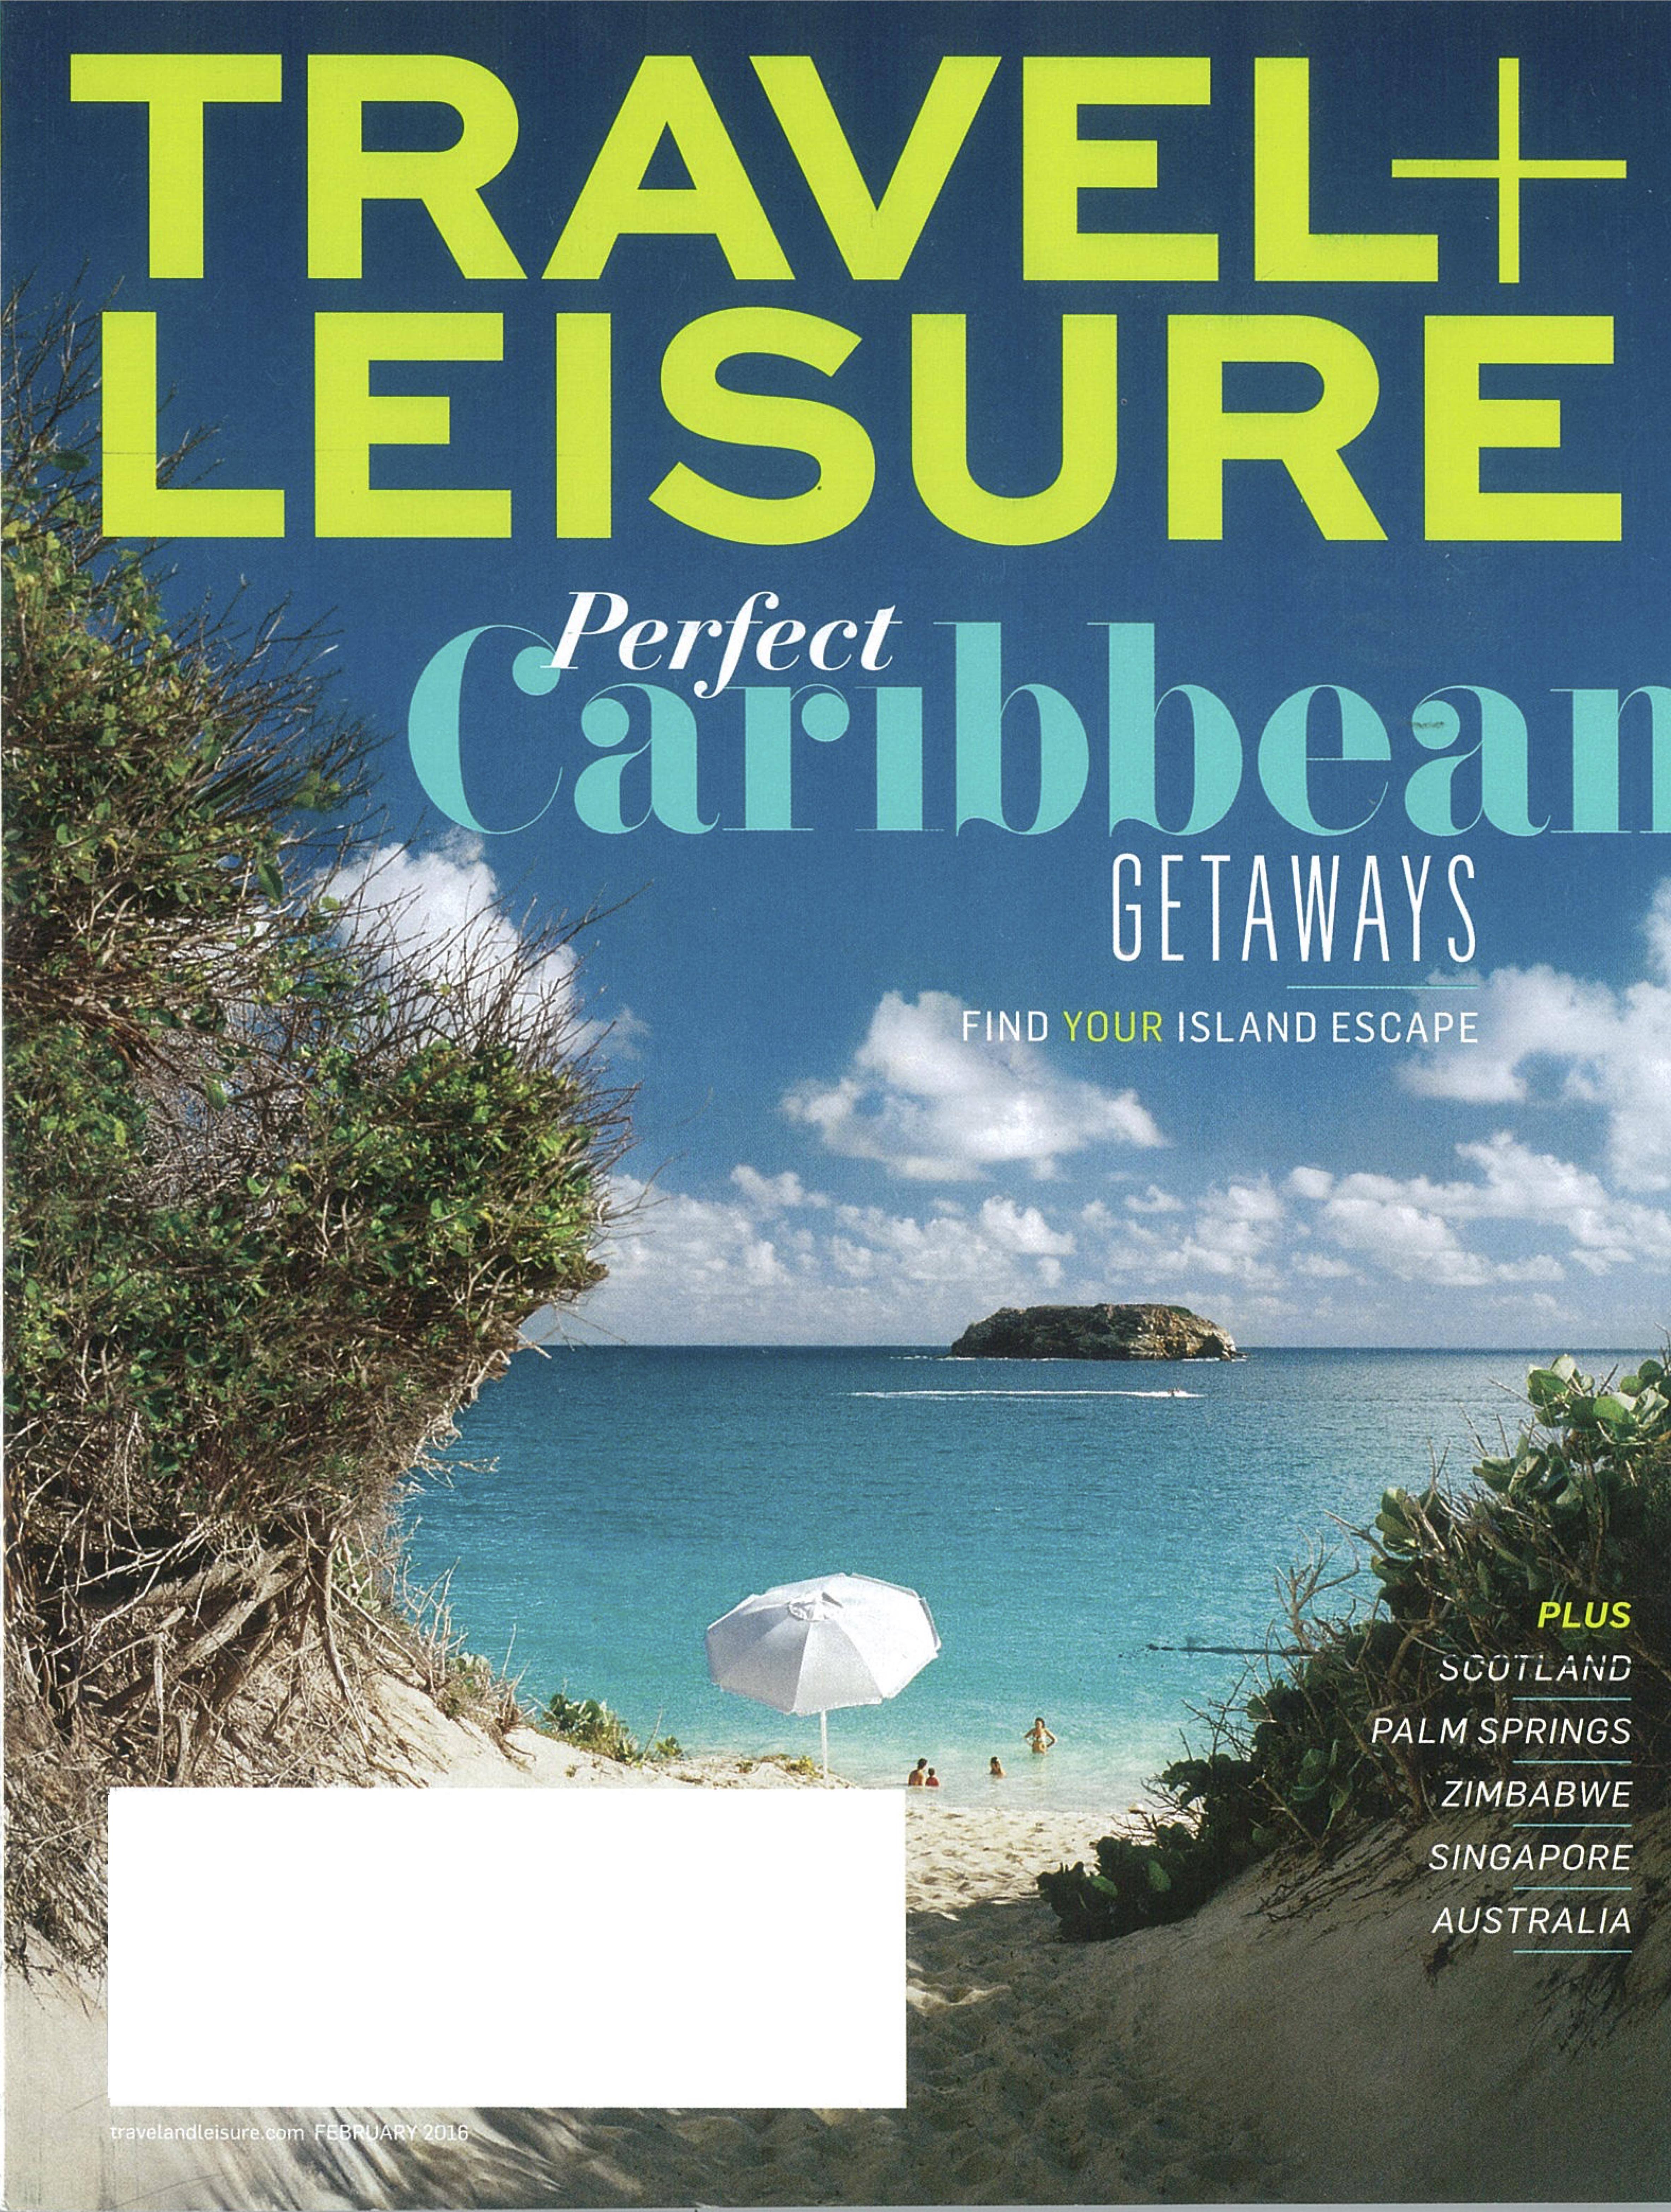 Travel + Leisure, February 2016 Island Outpost